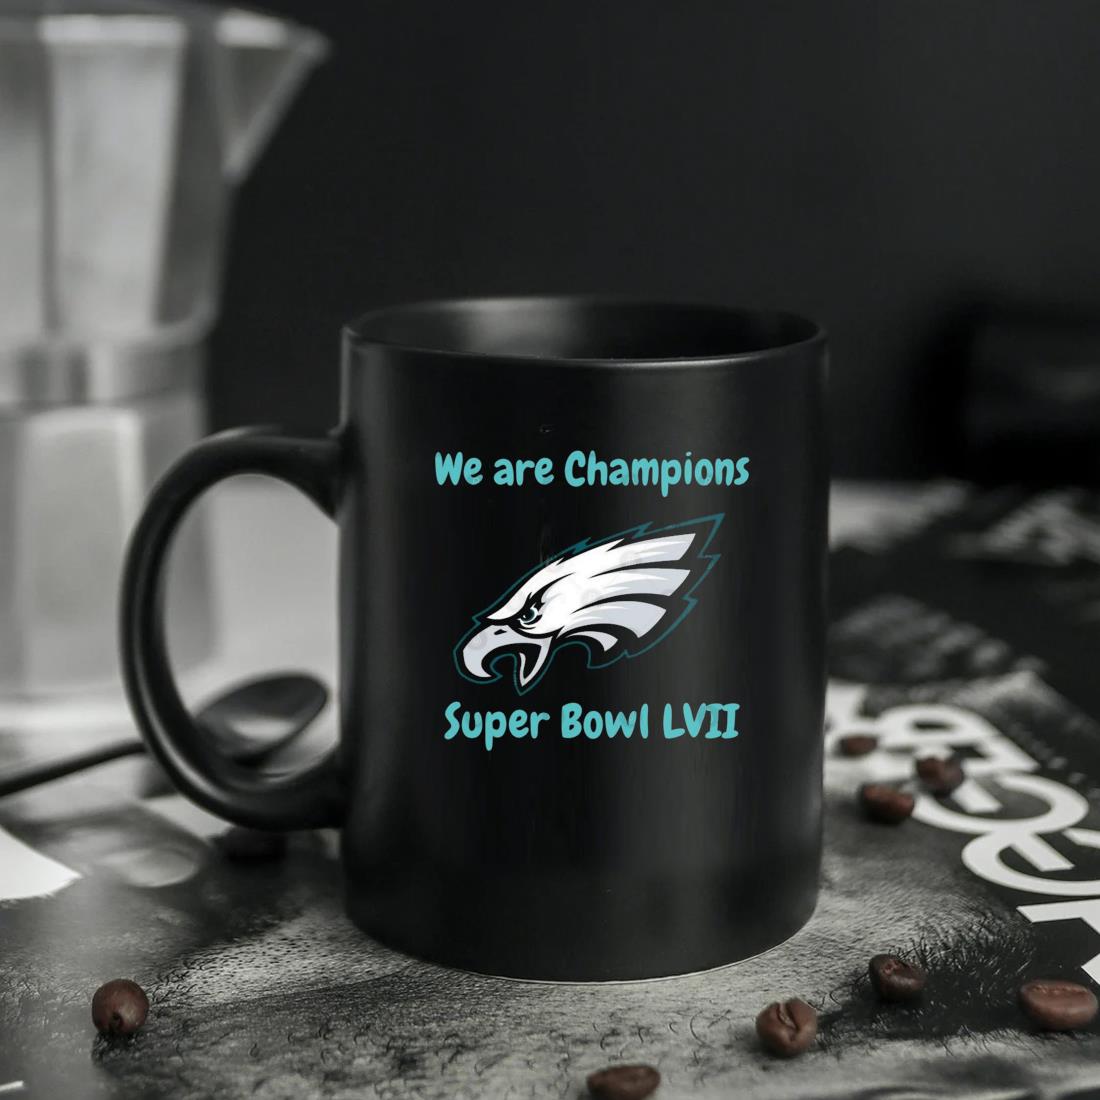 Eagles gear is selling out as hype intensifies for Super Bowl – Daily